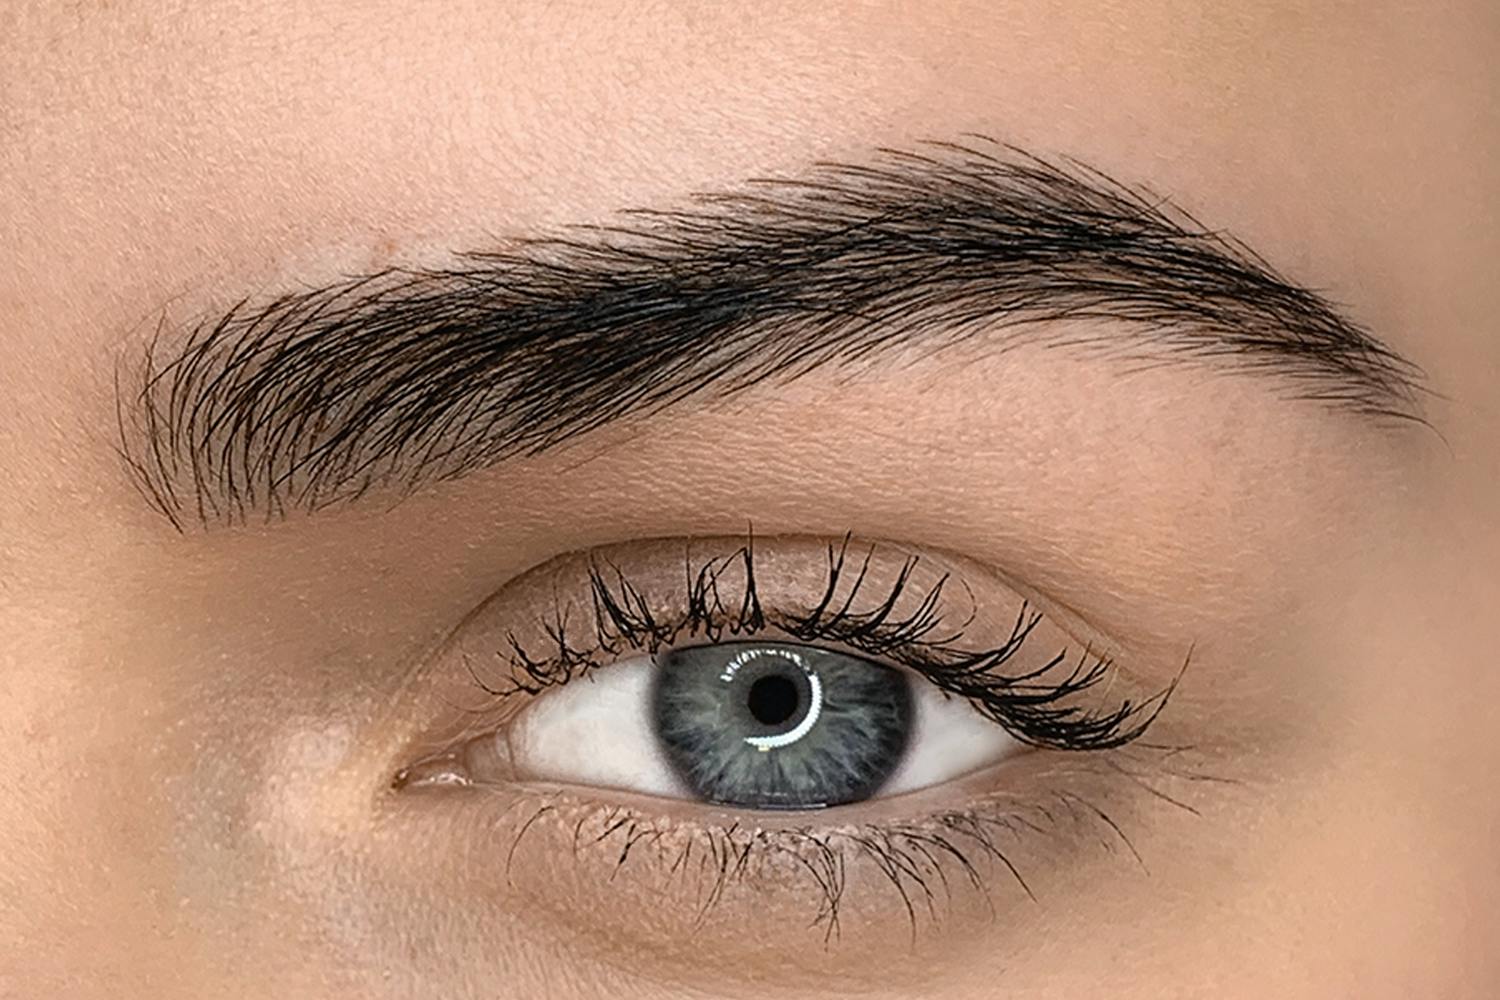 The best way to learn microblading online is to find a reputable organization that offers live training and see if they have online training - PhiAcademy